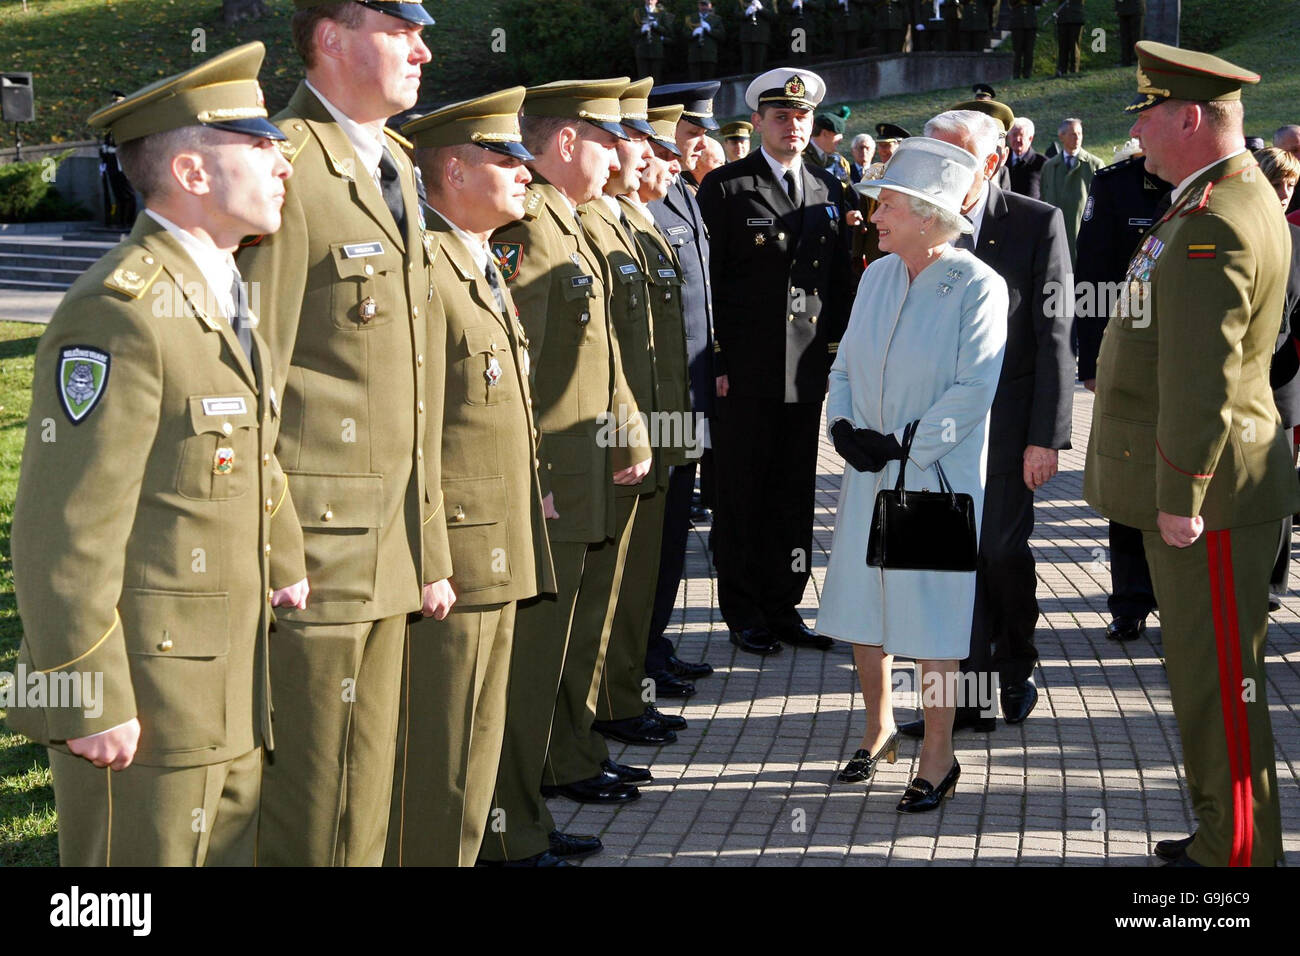 Britain's Queen Elizabeth II meets soldiers from the Lithuanian Army who have served in Afghanistan, at the Antakalnis Cemetery in Vilnius, during a state visit to Lithuania. Stock Photo